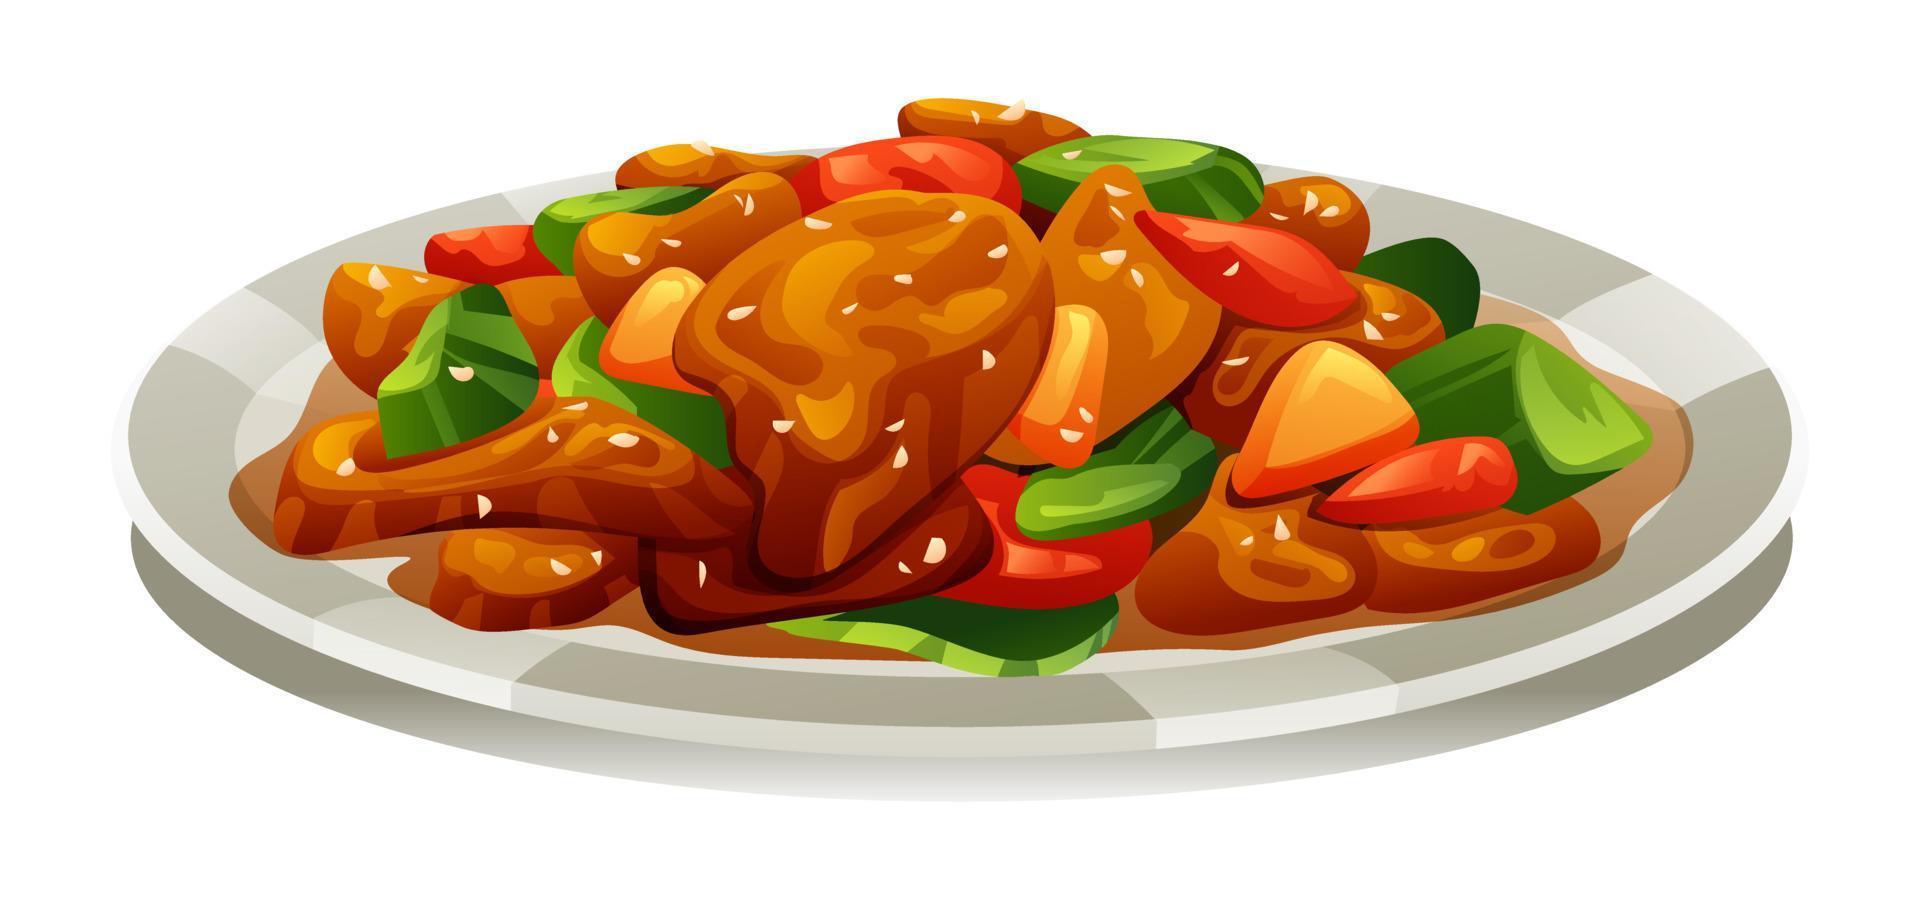 Sweet and sour pork. Chinese food vector illustration